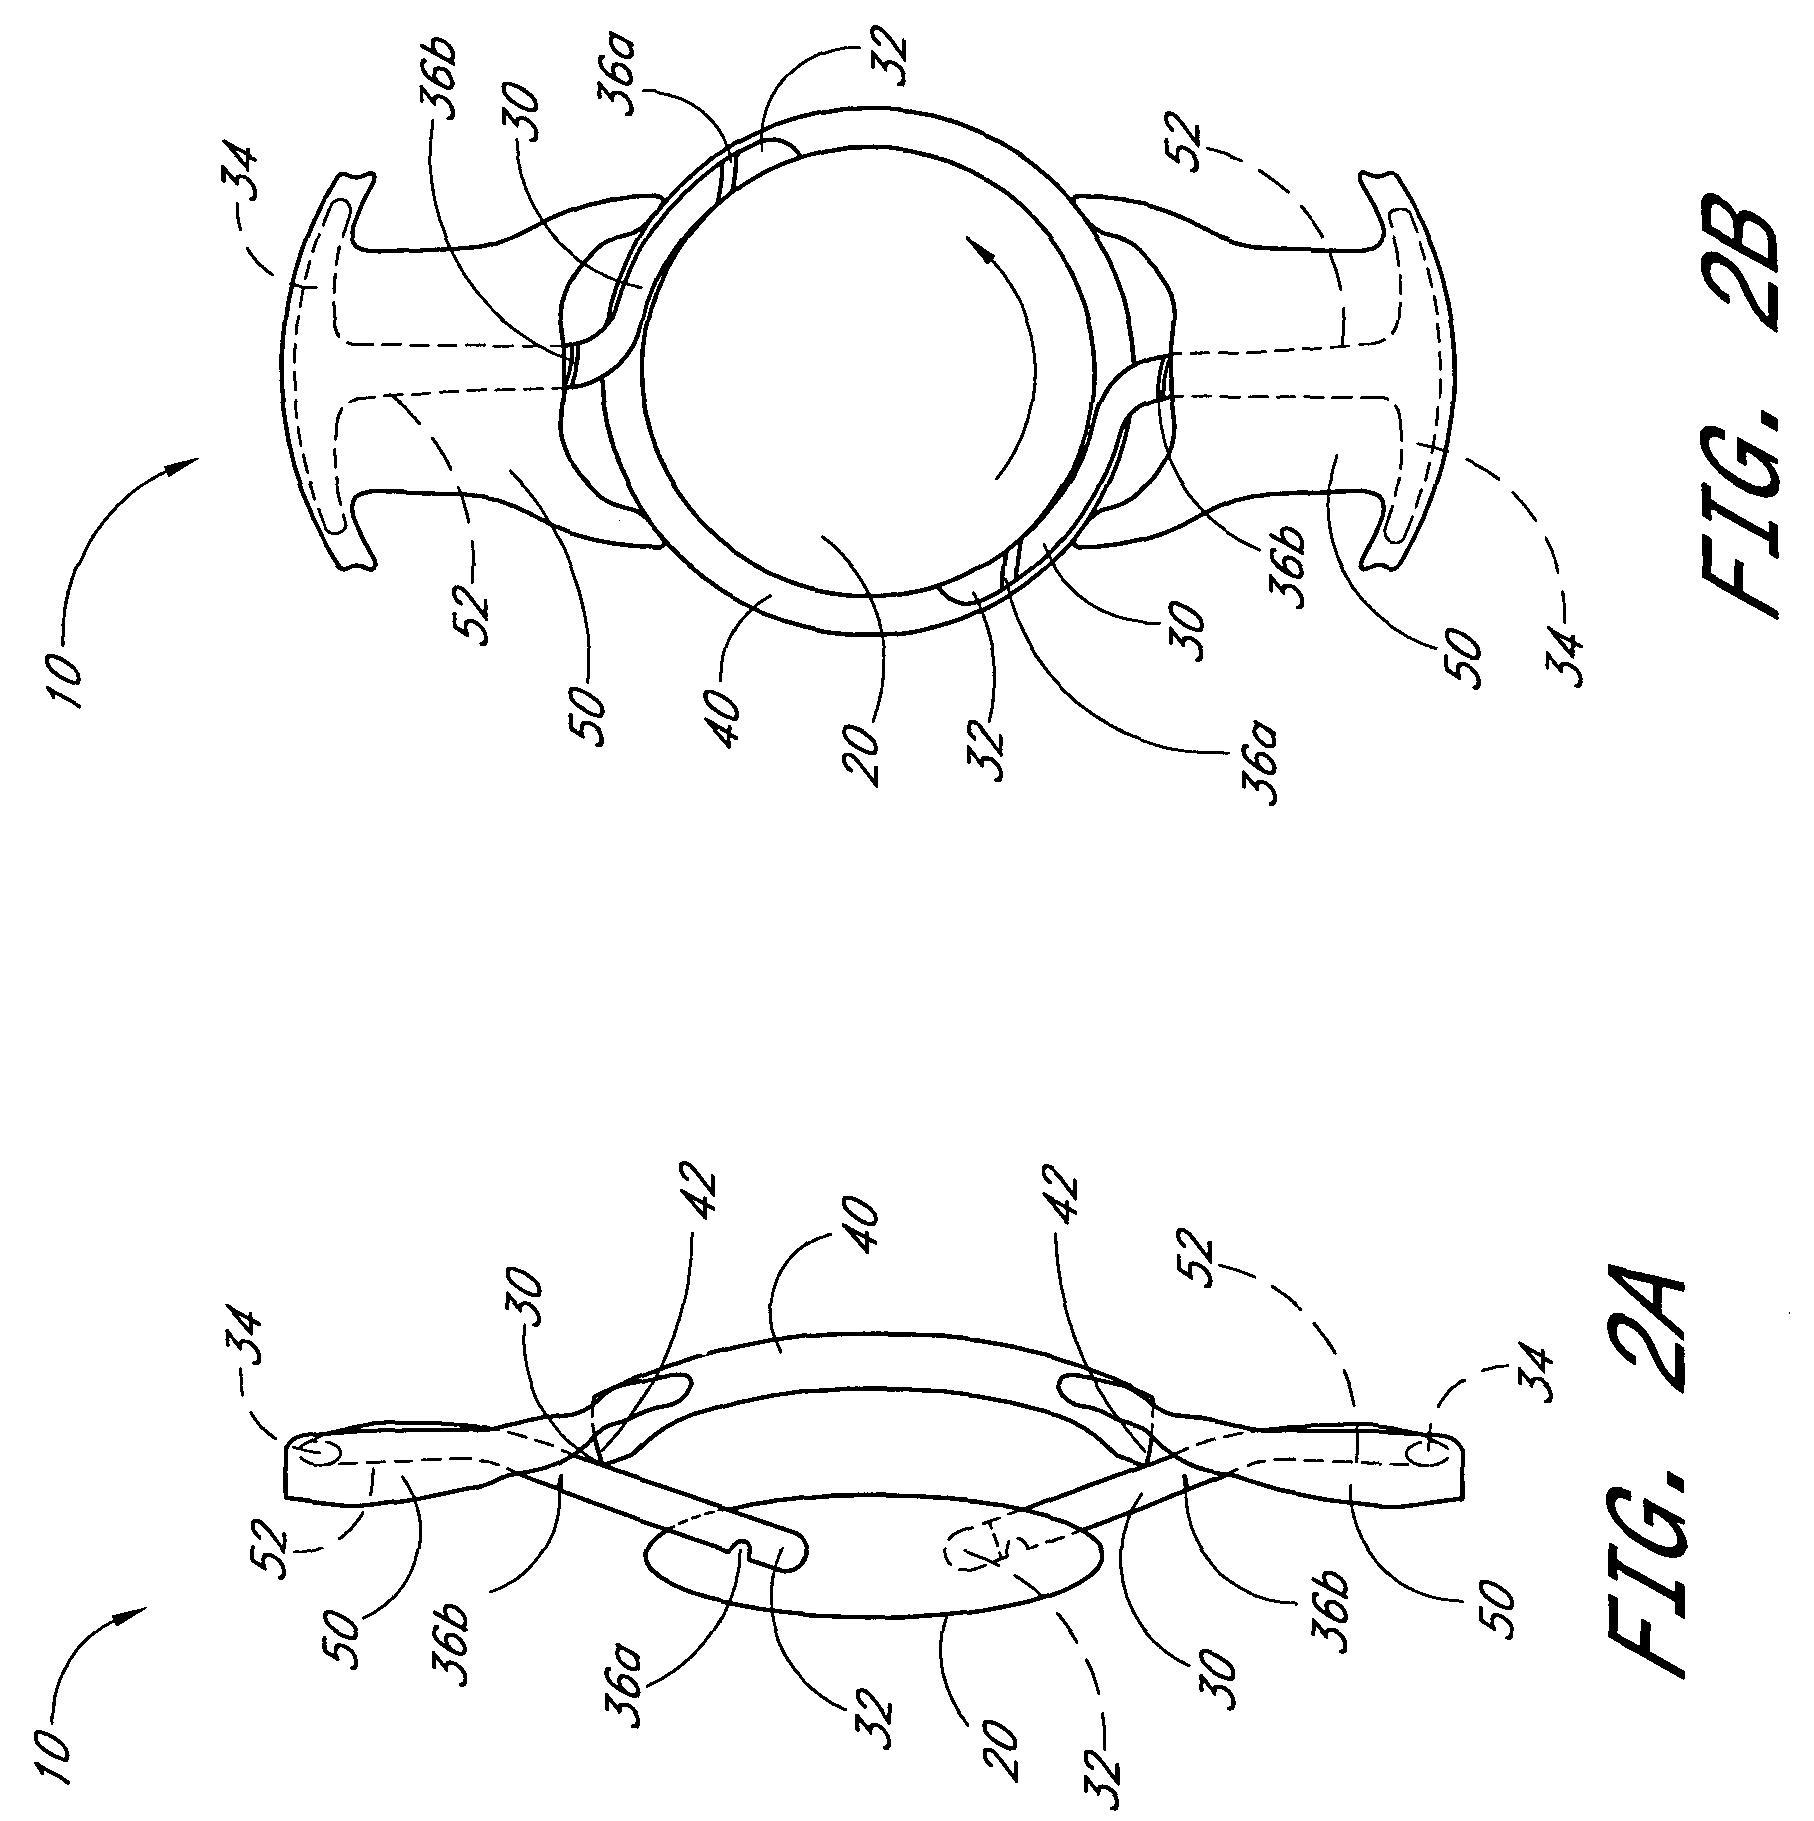 Accommodating intraocular lens system with enhanced range of motion